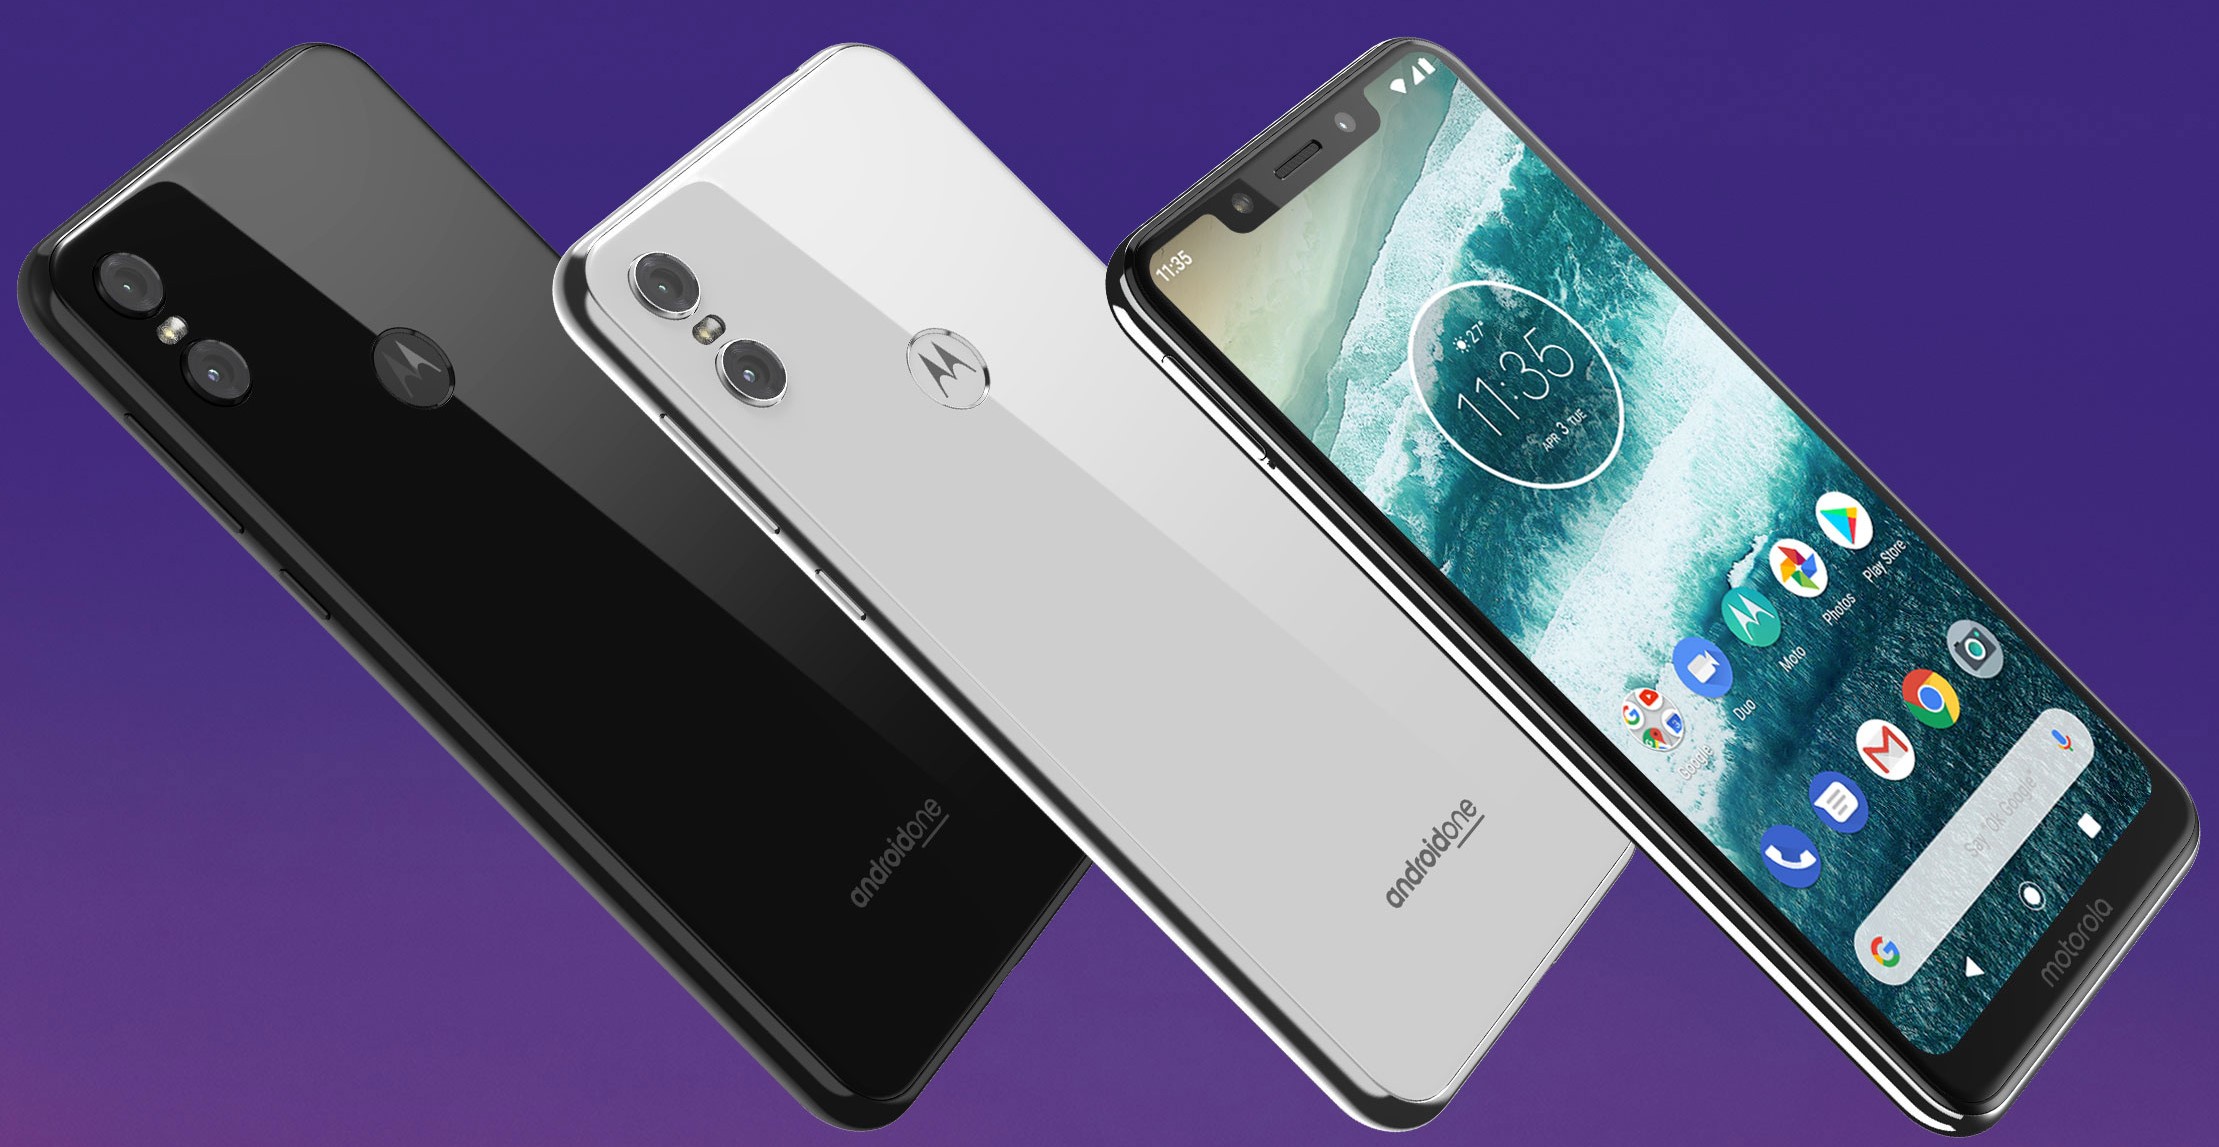 Motorola One Officially Launched in India